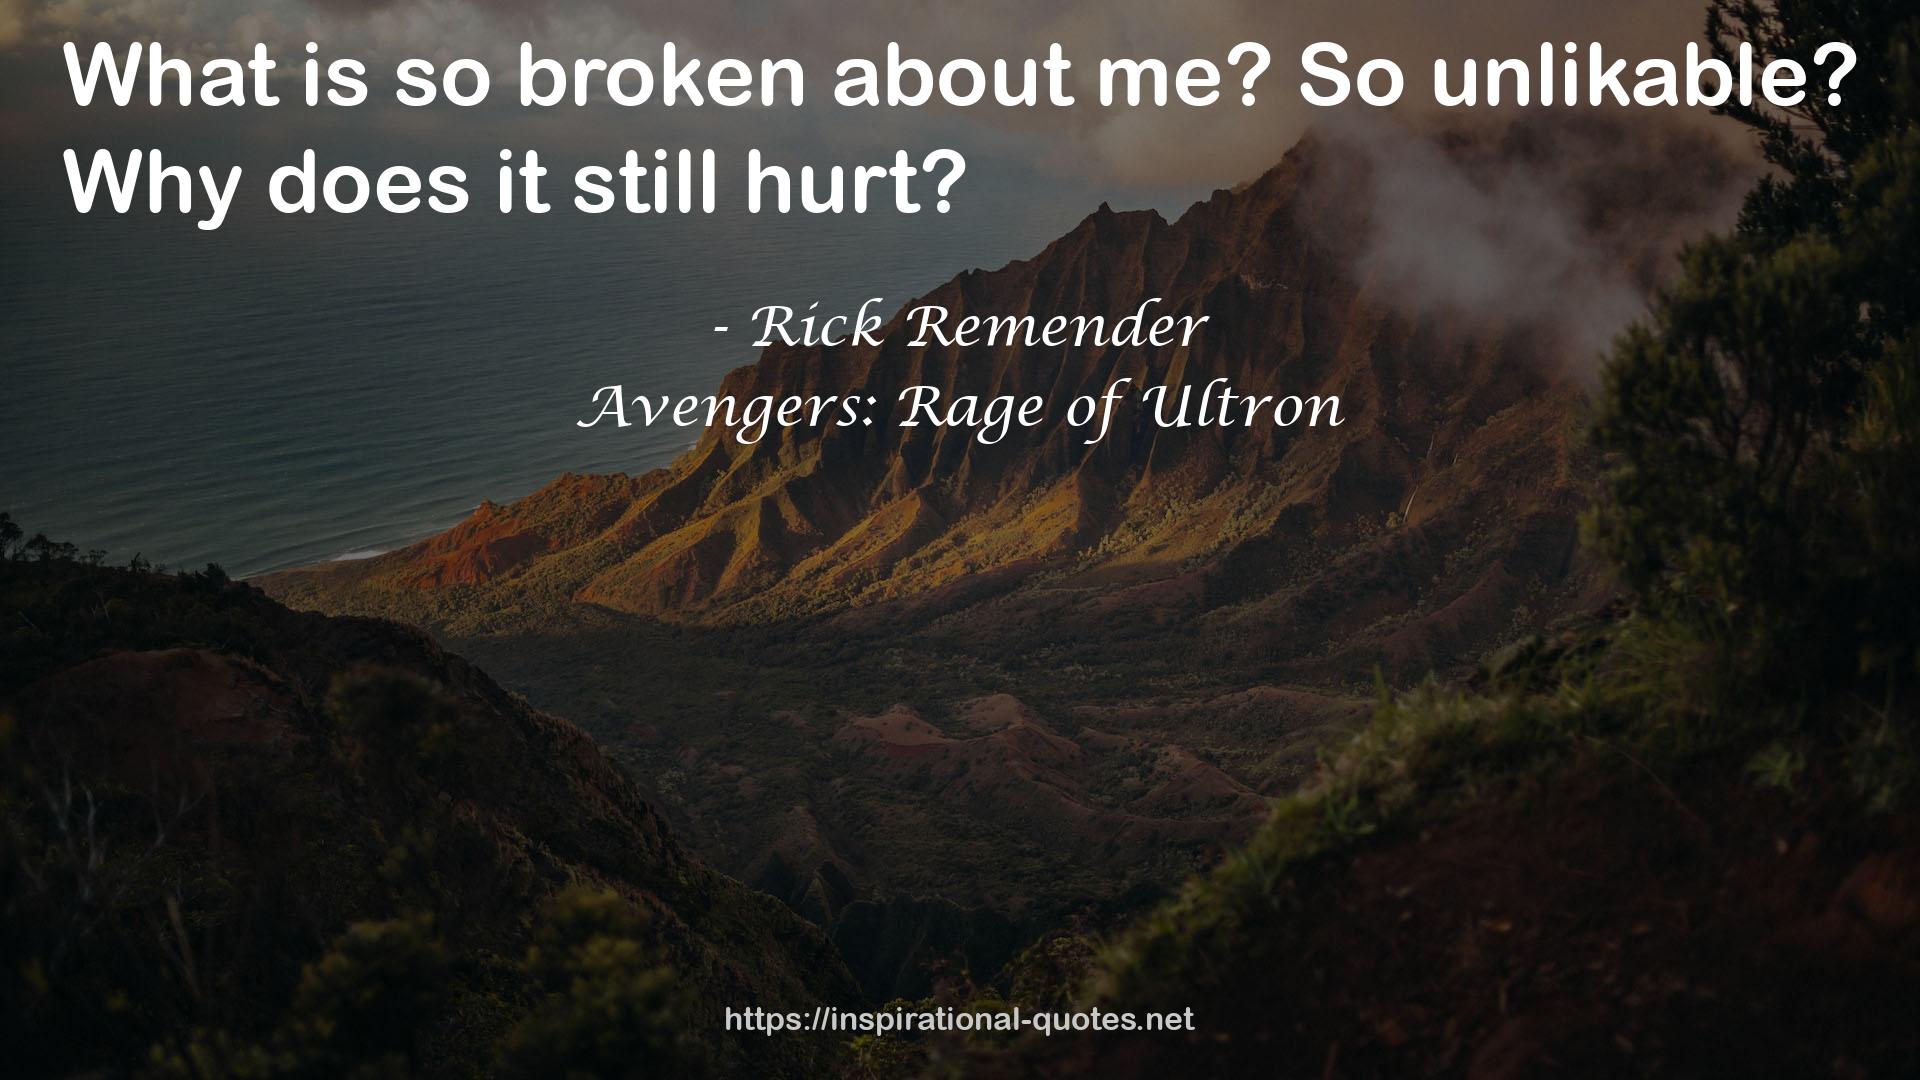 Avengers: Rage of Ultron QUOTES